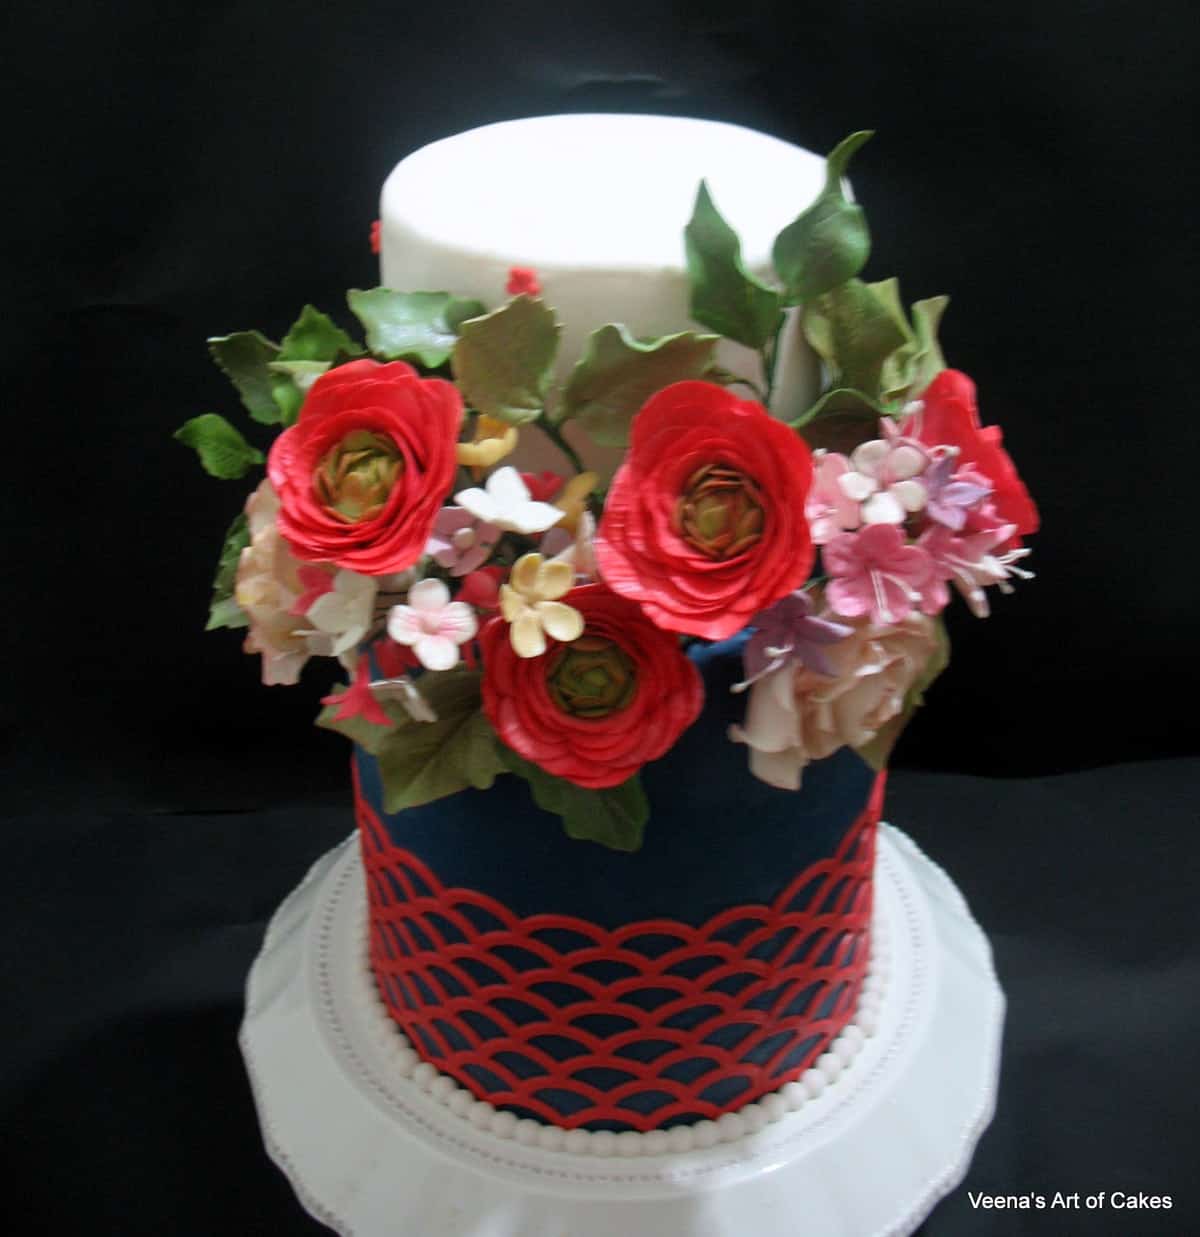 A decorated cake with sugar flowers.